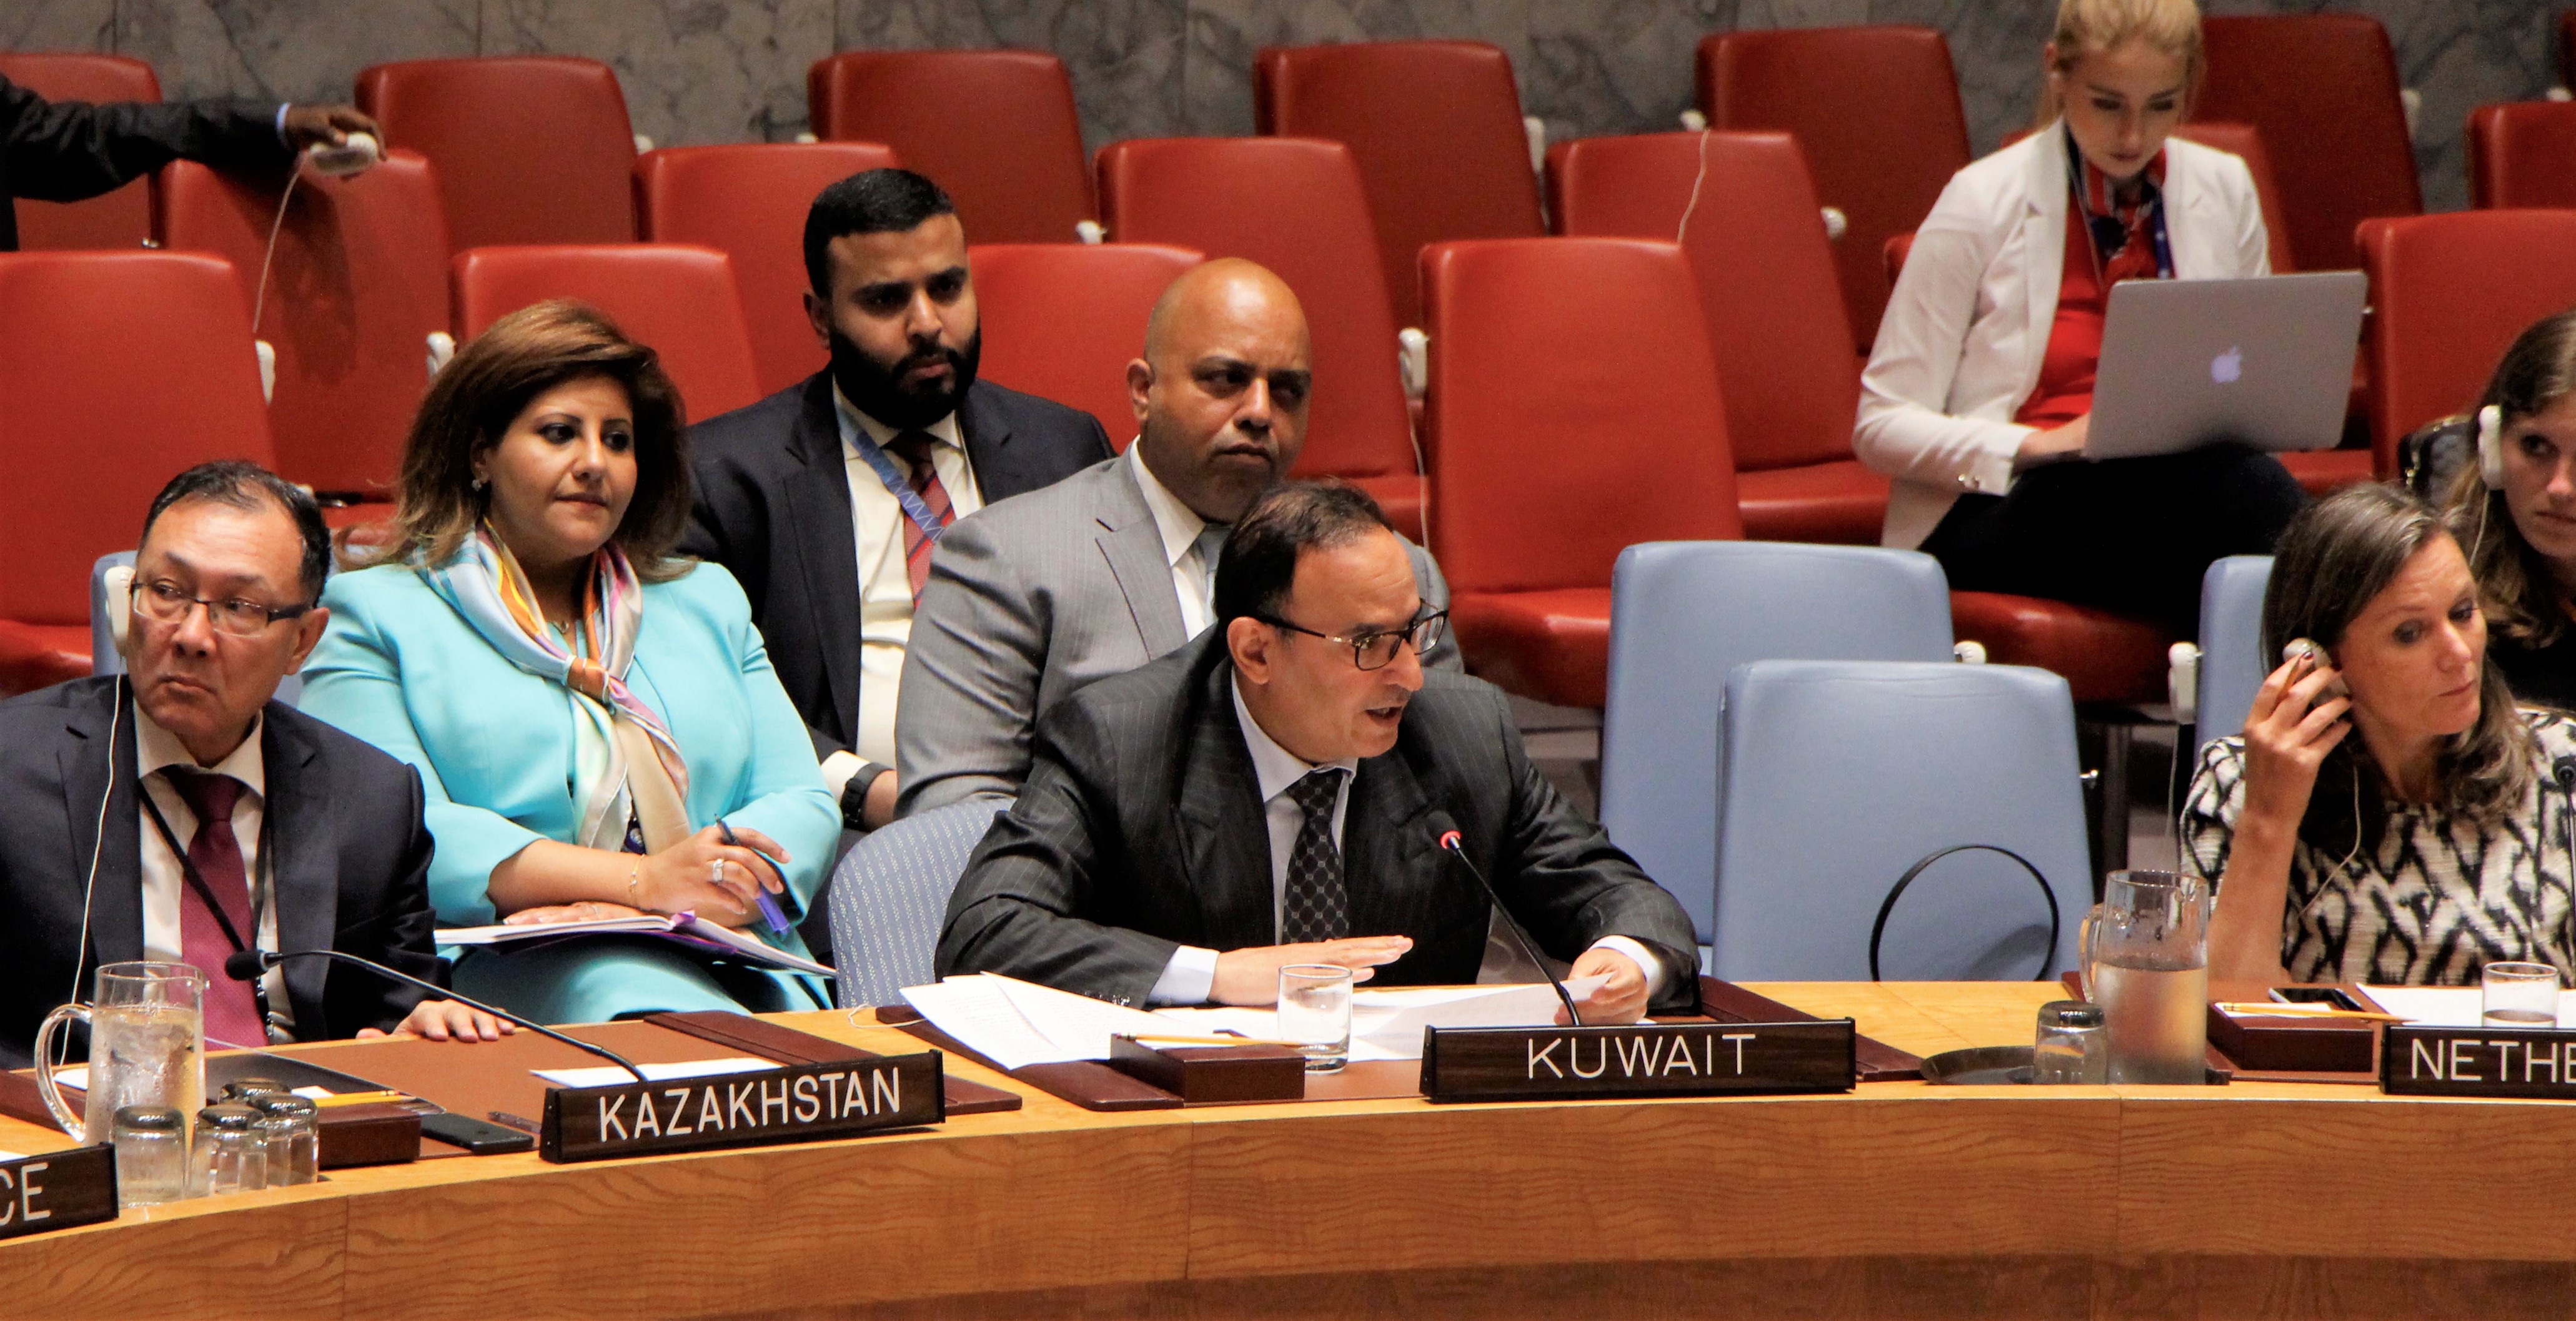 Kuwait's Permanent Representative to the United Nations Ambassador Mansour Al-Otaibi addresses the Security Council session